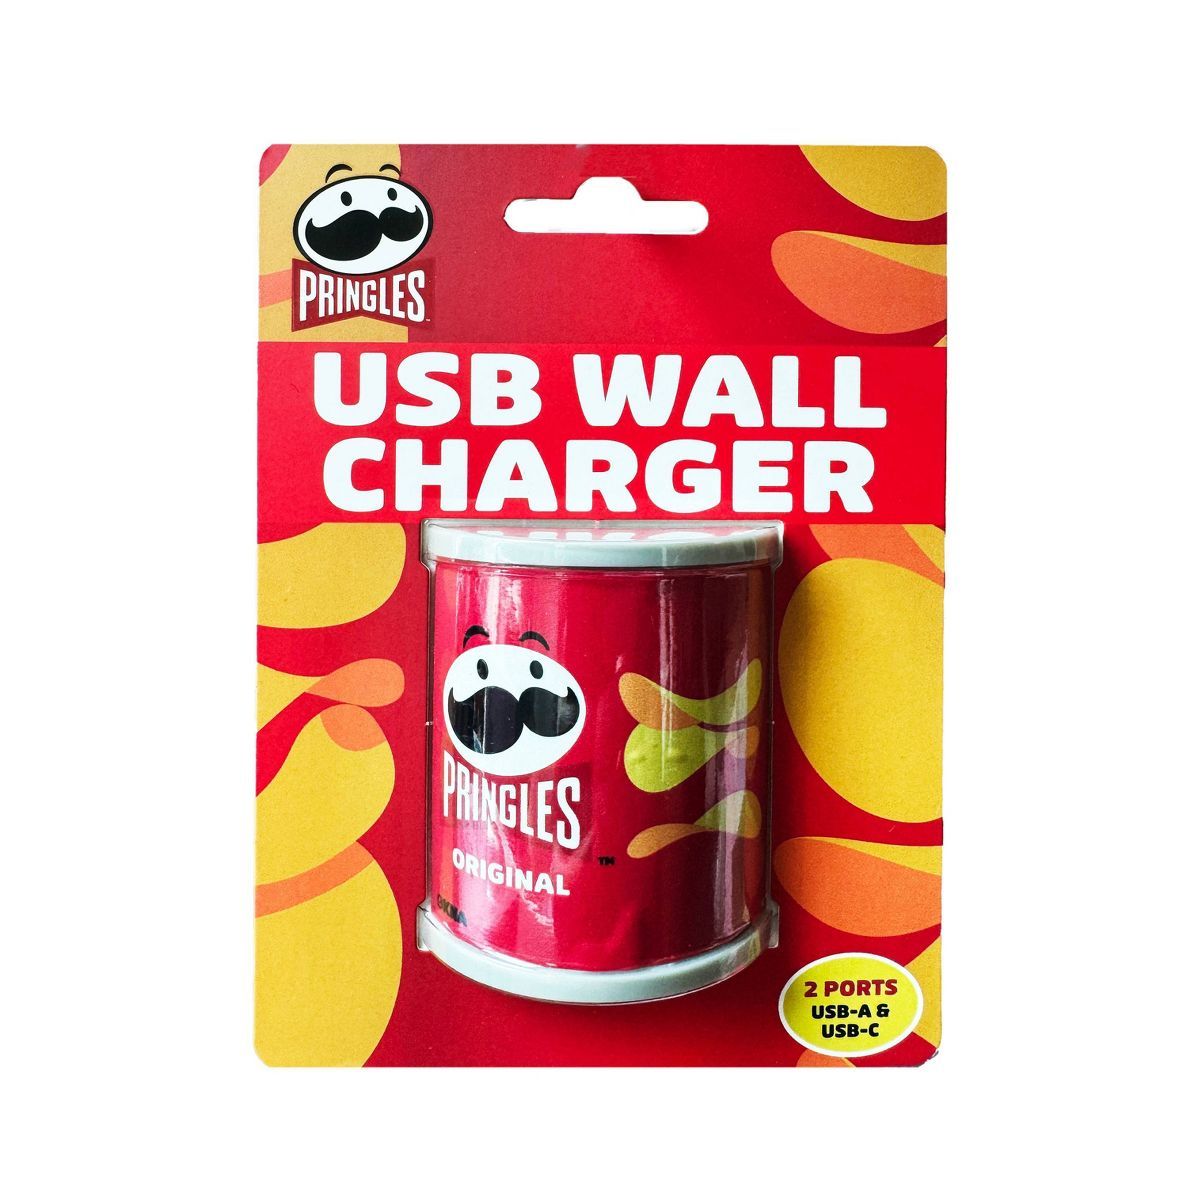 Orbit innovations USB Wall Chargers - Pringles | Target